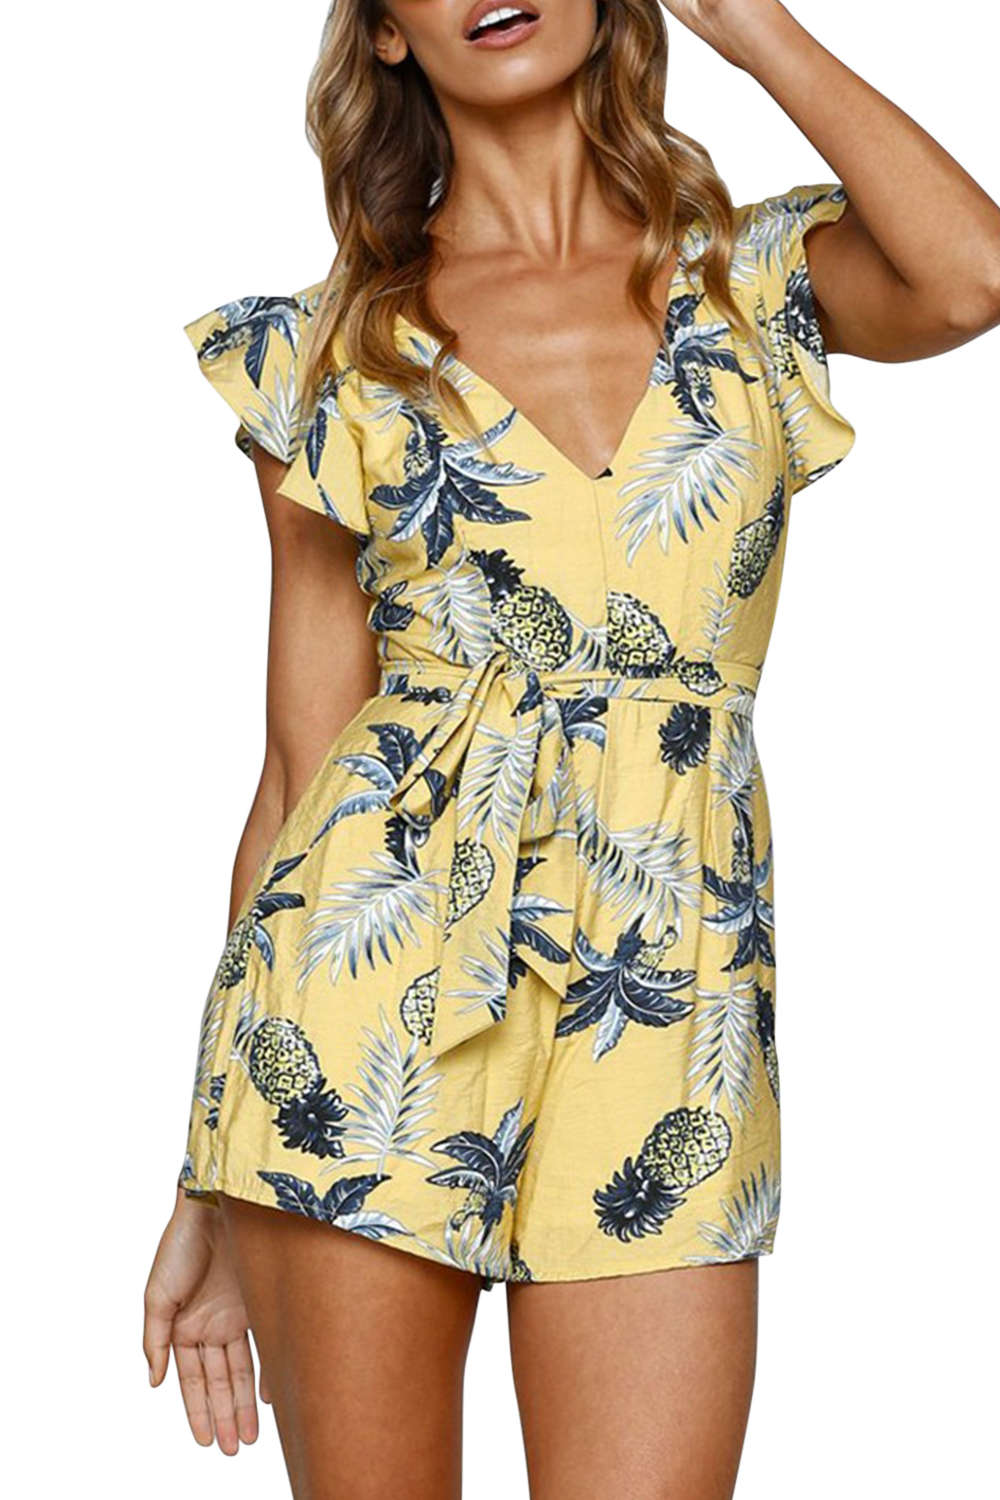 Iyasson Floral Printing Sexy Romper 